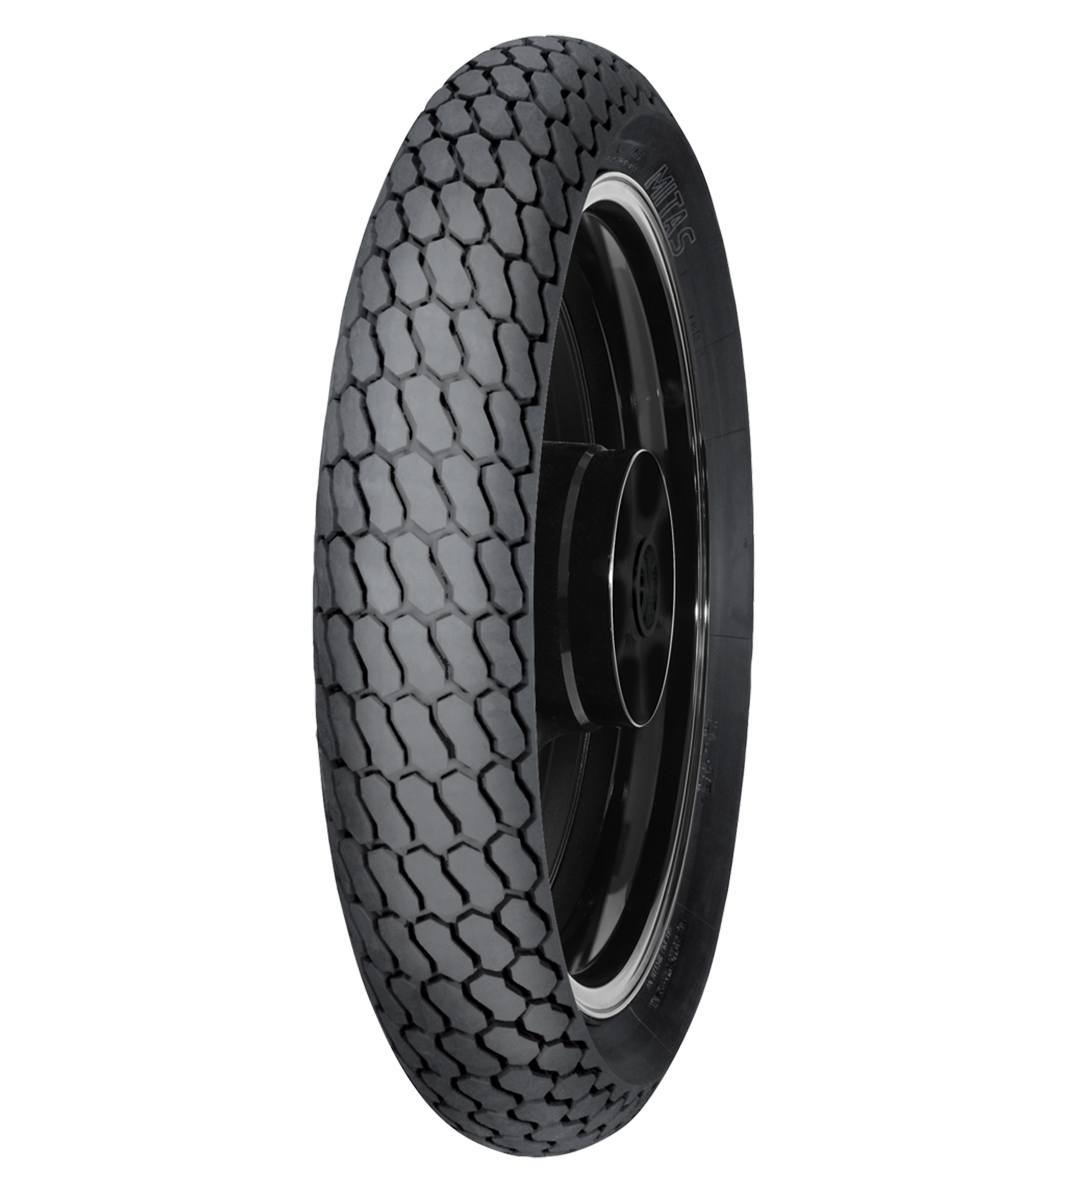 Mitas H-18 HIGHWAY 140/80-19 (27.5x7.5-19) Motorcycle Sport On-Road ROAD 71H No Stripe Tubeless Rear Tire, 223440, 140/80-19, H-18 Highway, Motorcycle Sport, On-Road, Rear, Sport, Tires - Imported and distributed in North &amp; South America by Lindeco Genuine Powersports - Premier Powersports Equipment and Accessories for Motorcycle Enthusiasts, Professional Riders and Dealers.